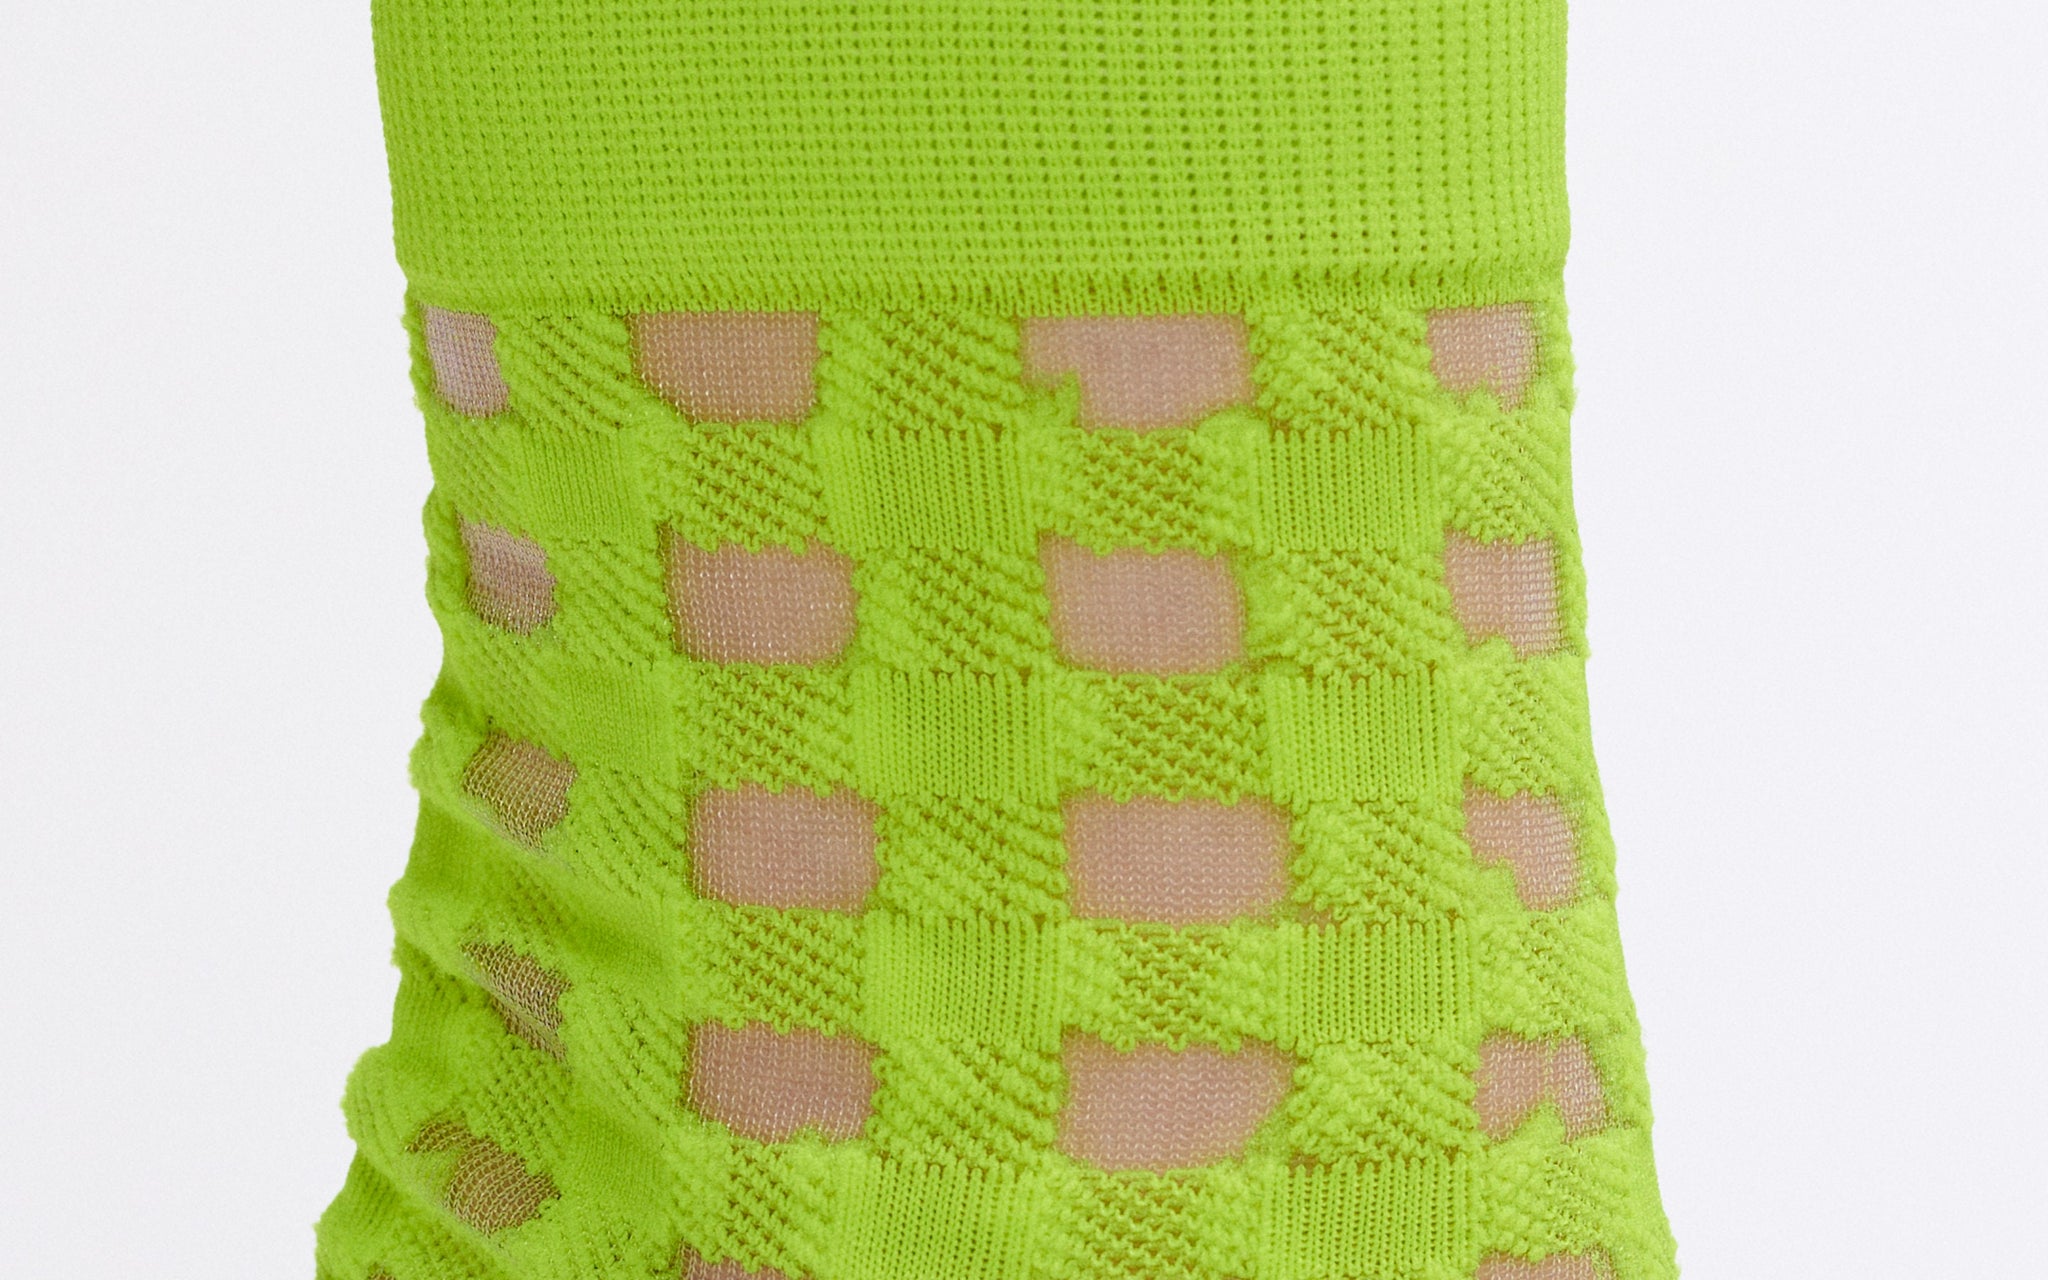 The Semi Sheer Gingham Socks | Fluorescent Yellow and Clear | Half Cutout Invisible Thread Socks in Hi Vis Plaid Grid Pattern | Goose Taffy